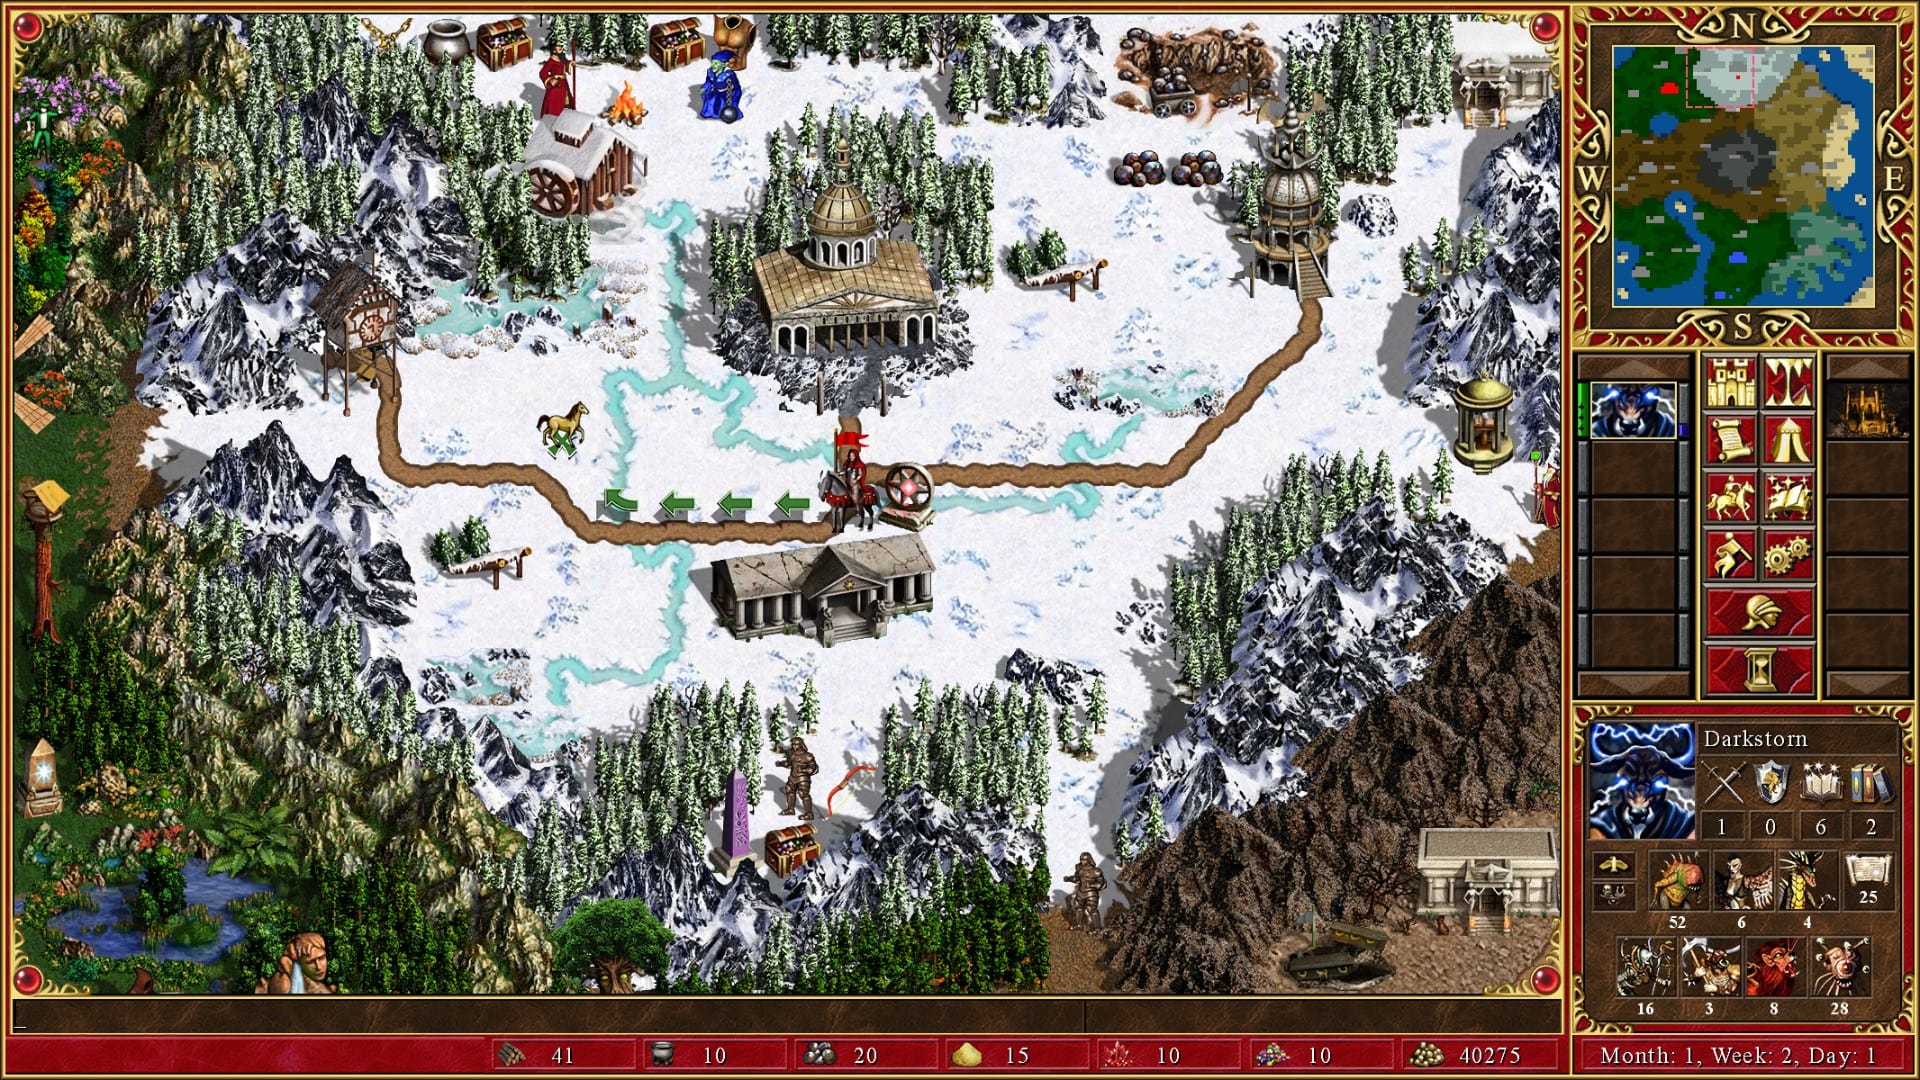 download heroes of might and magic 6 windows 10 for free